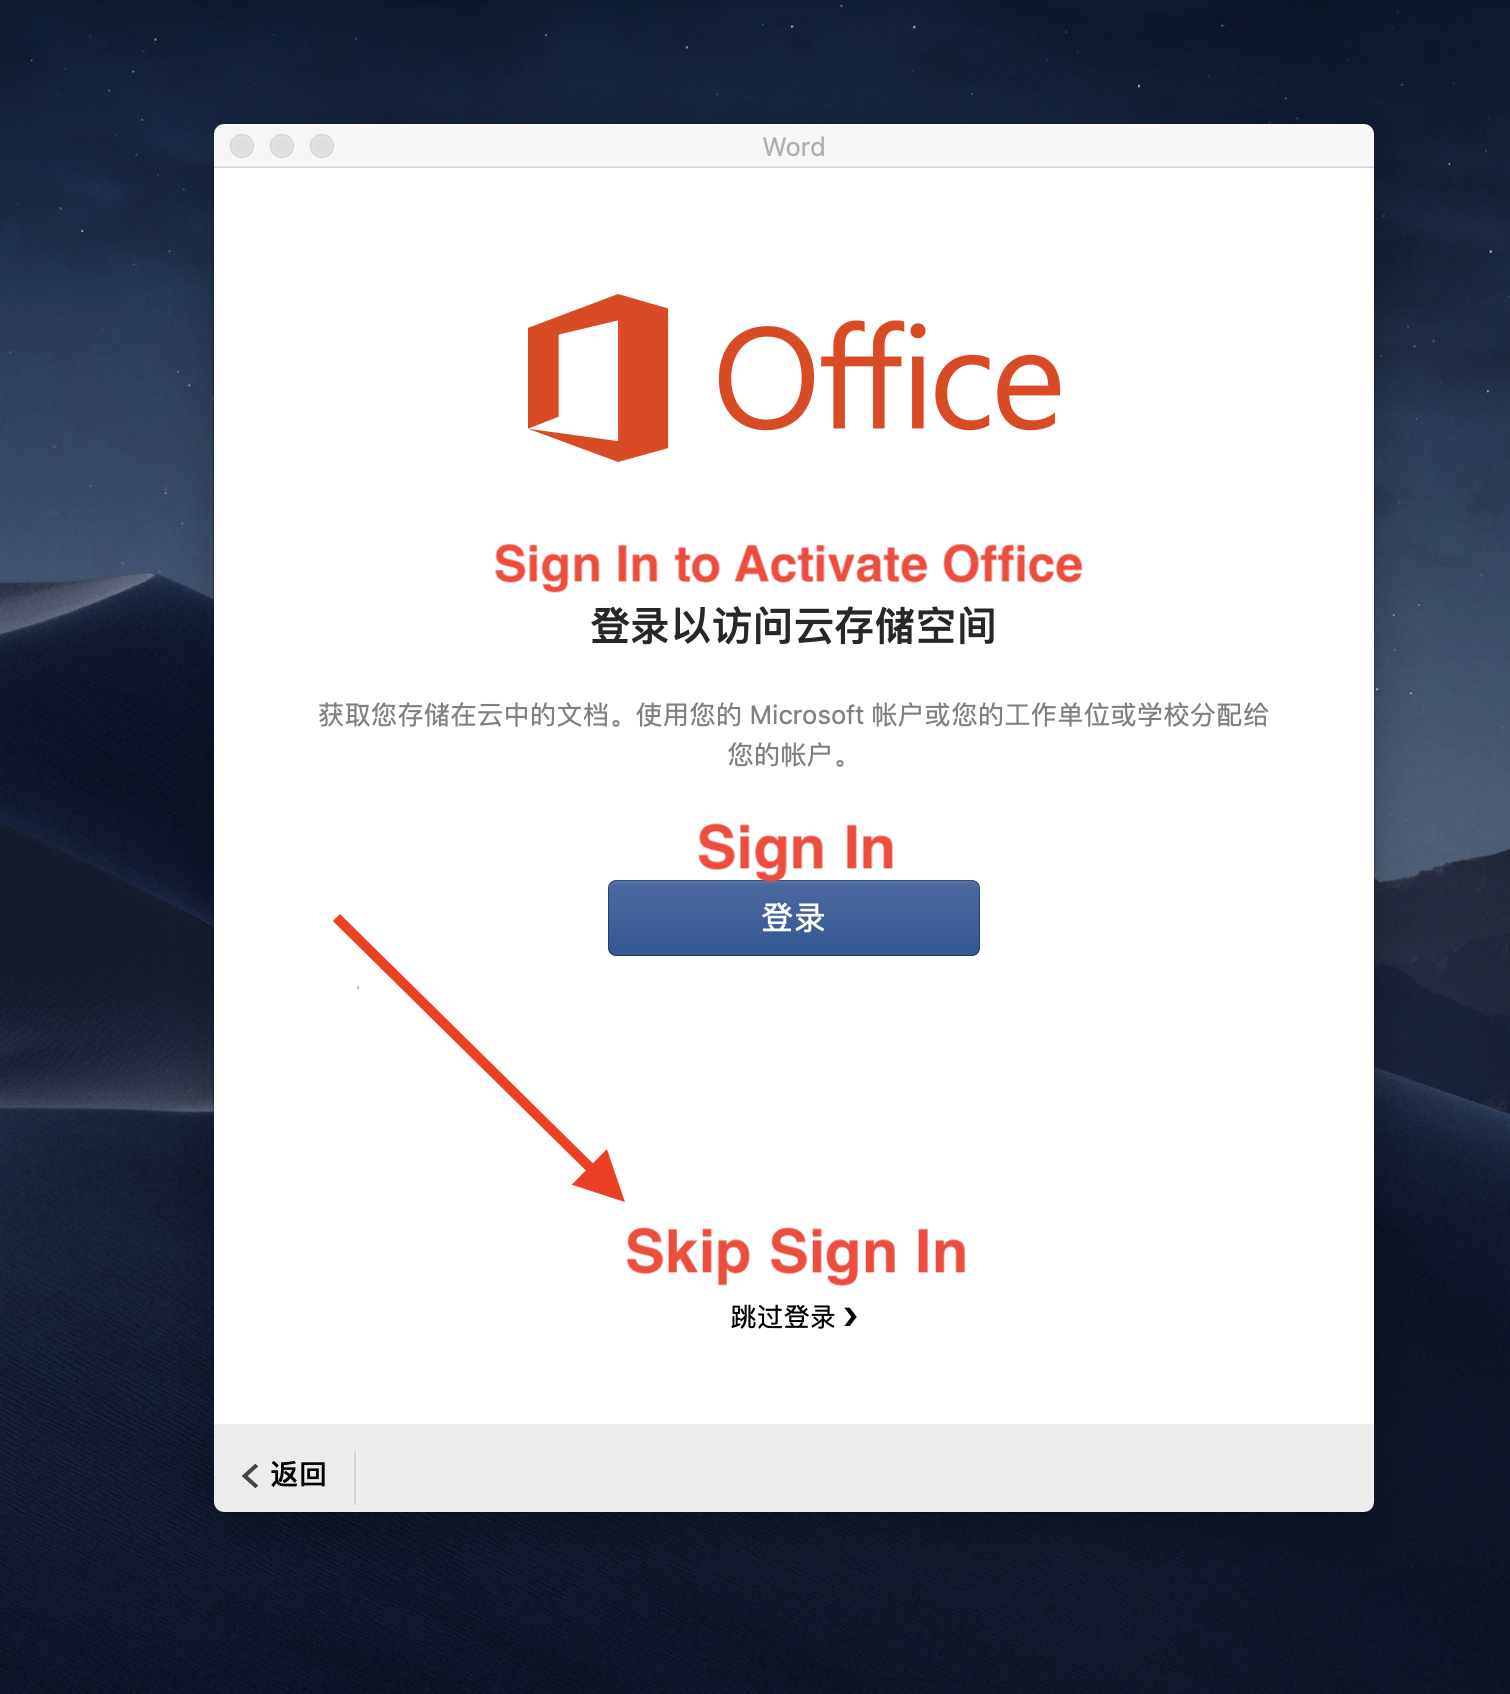 Office 2019 Mac Download Serializer